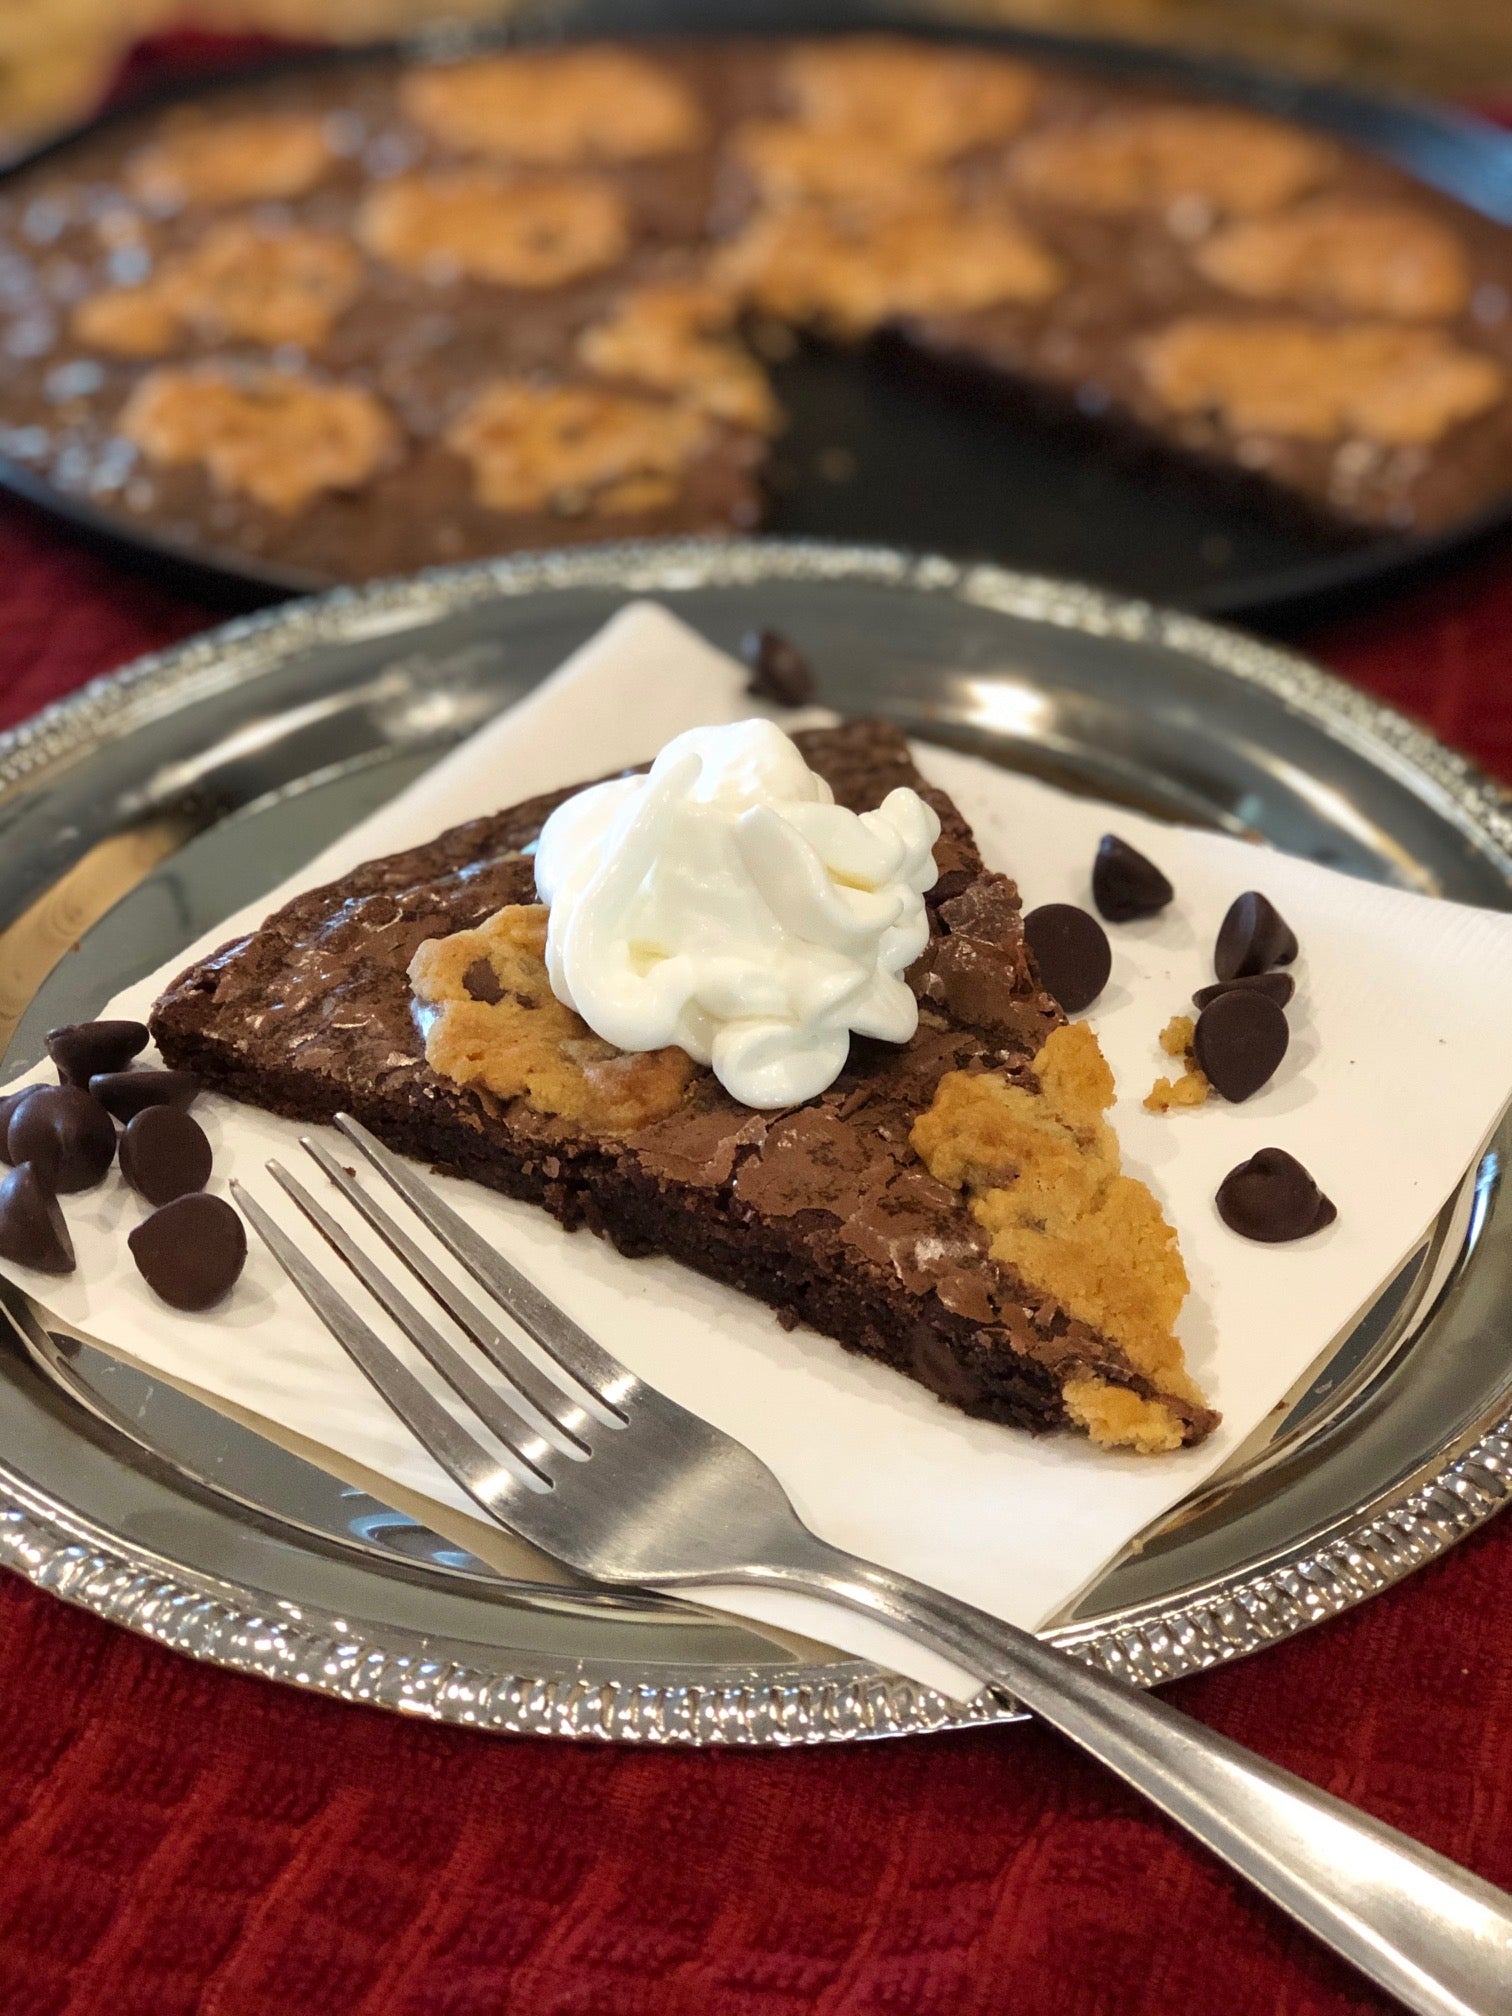 ABS Protein "Brookie" Cake! A Brownie & Cookie Cake in One!